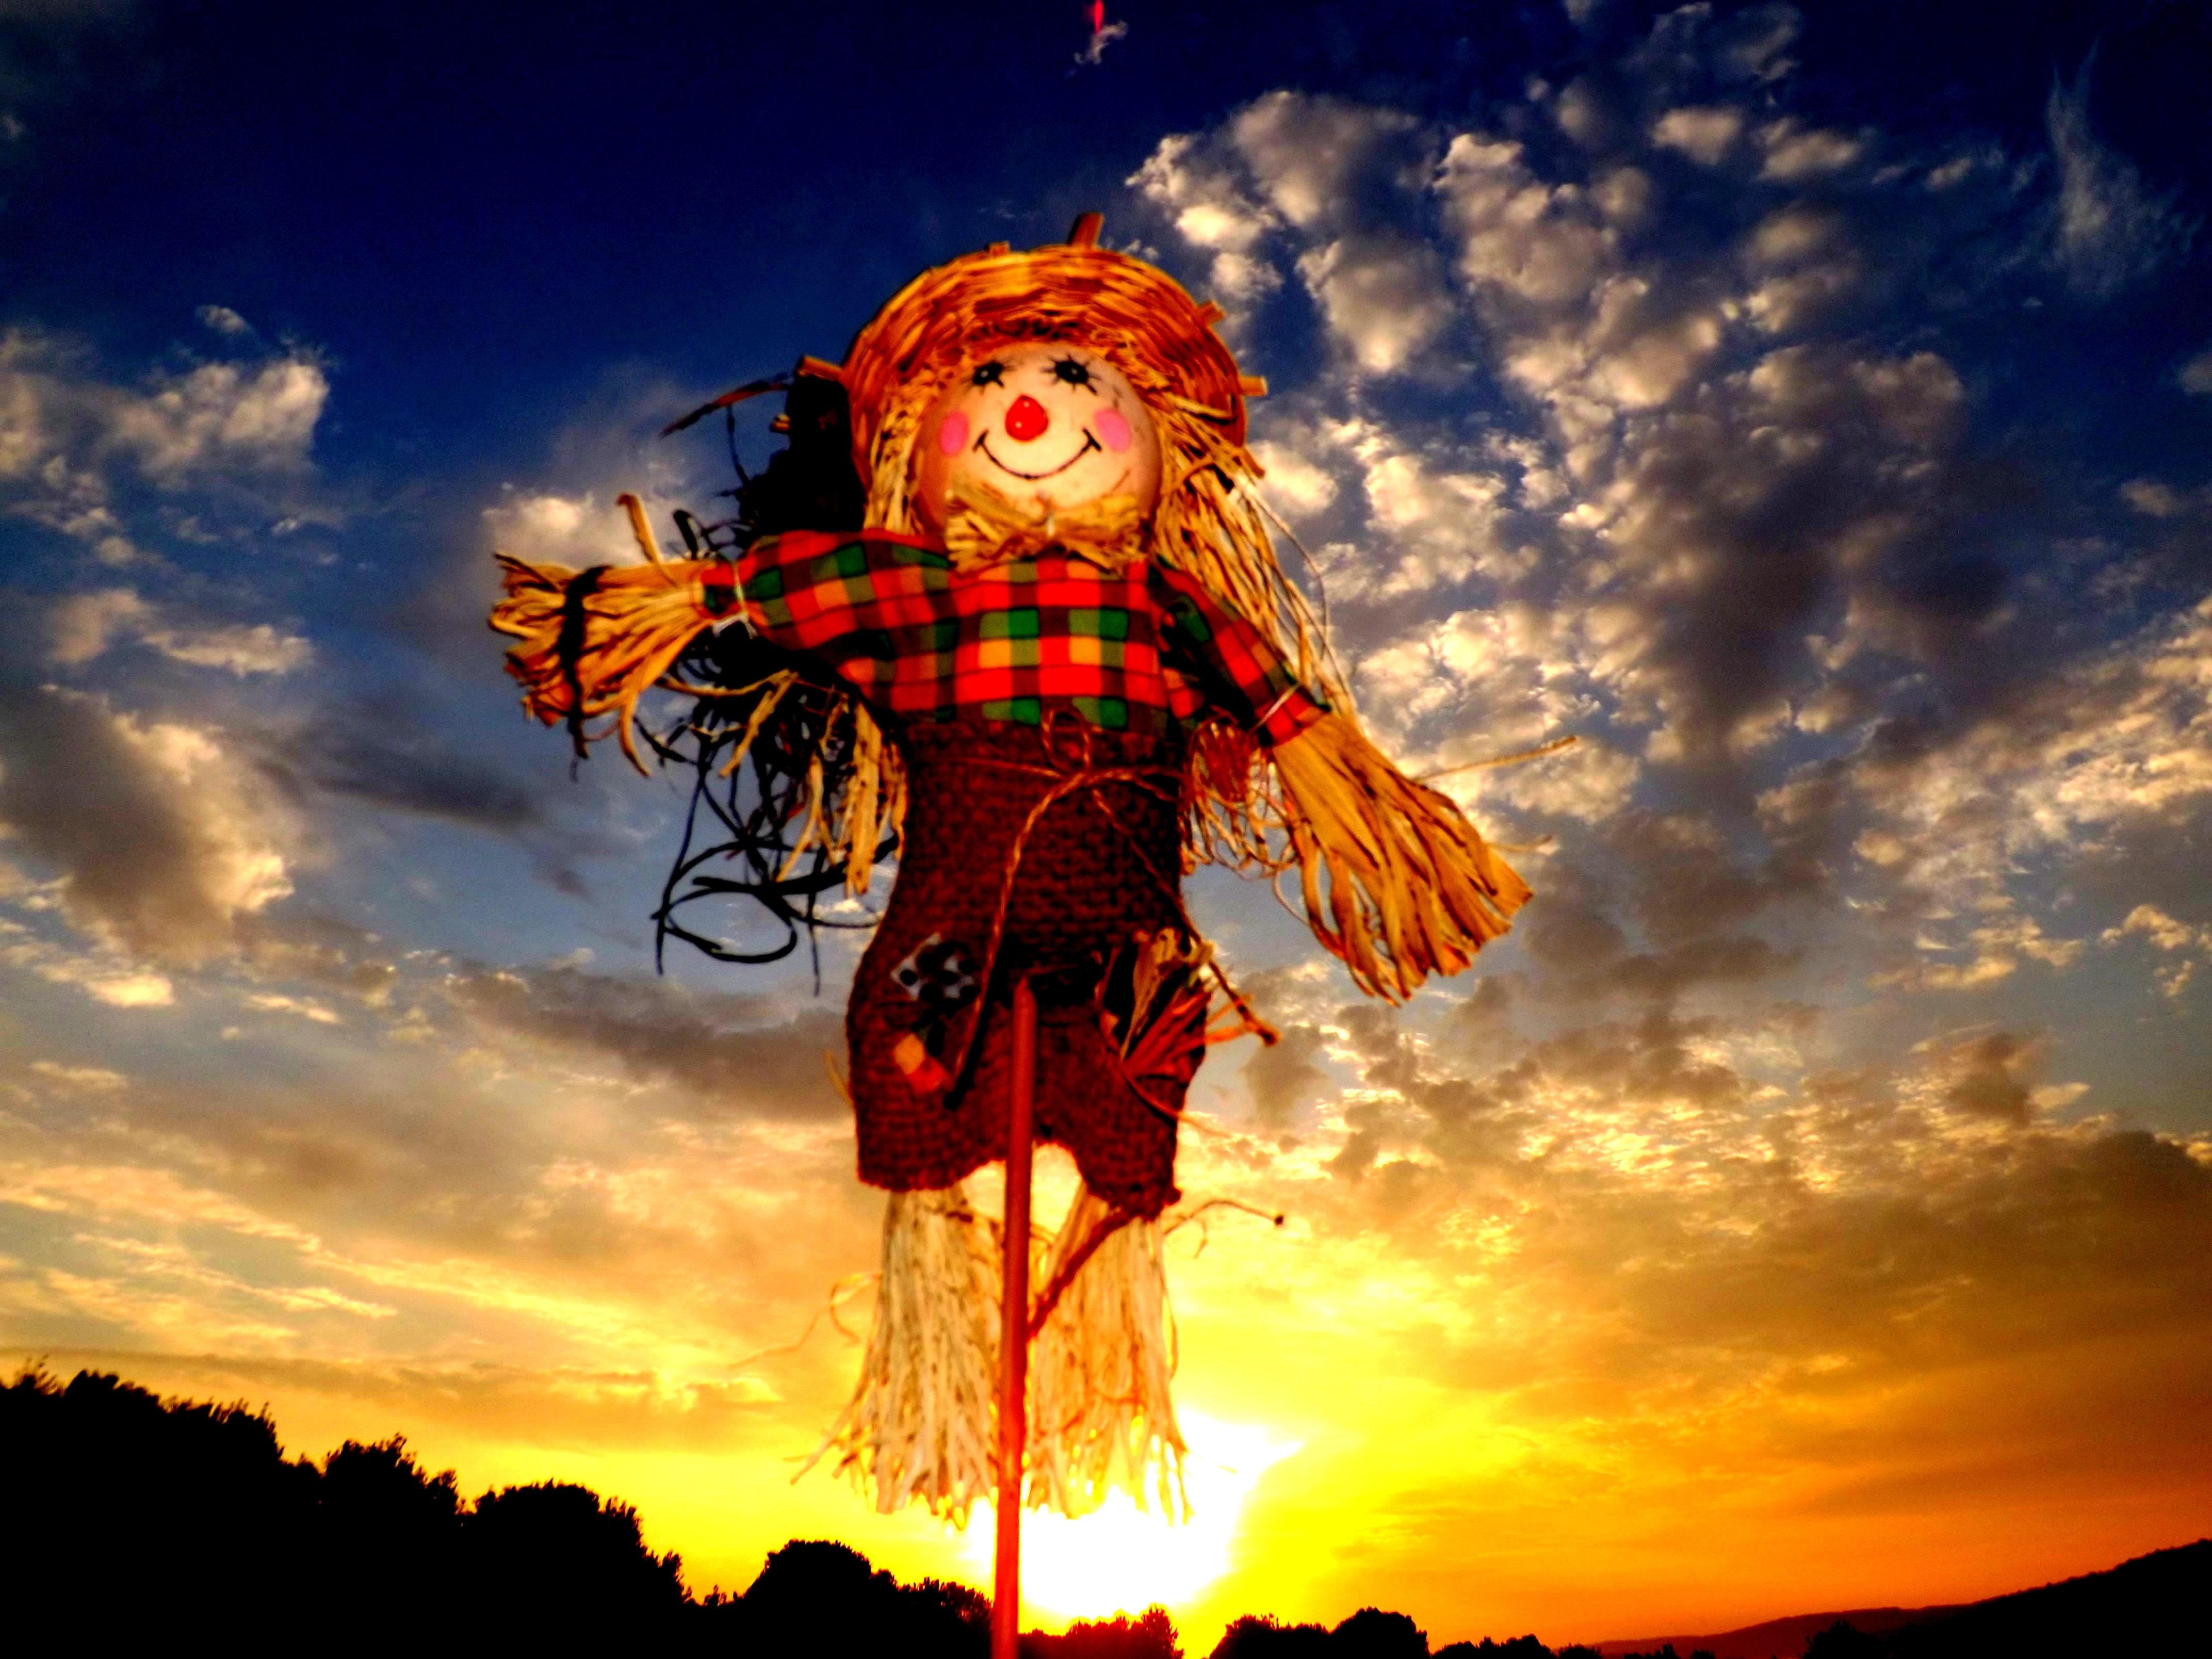 scare crow doll in red and green plaid shirt